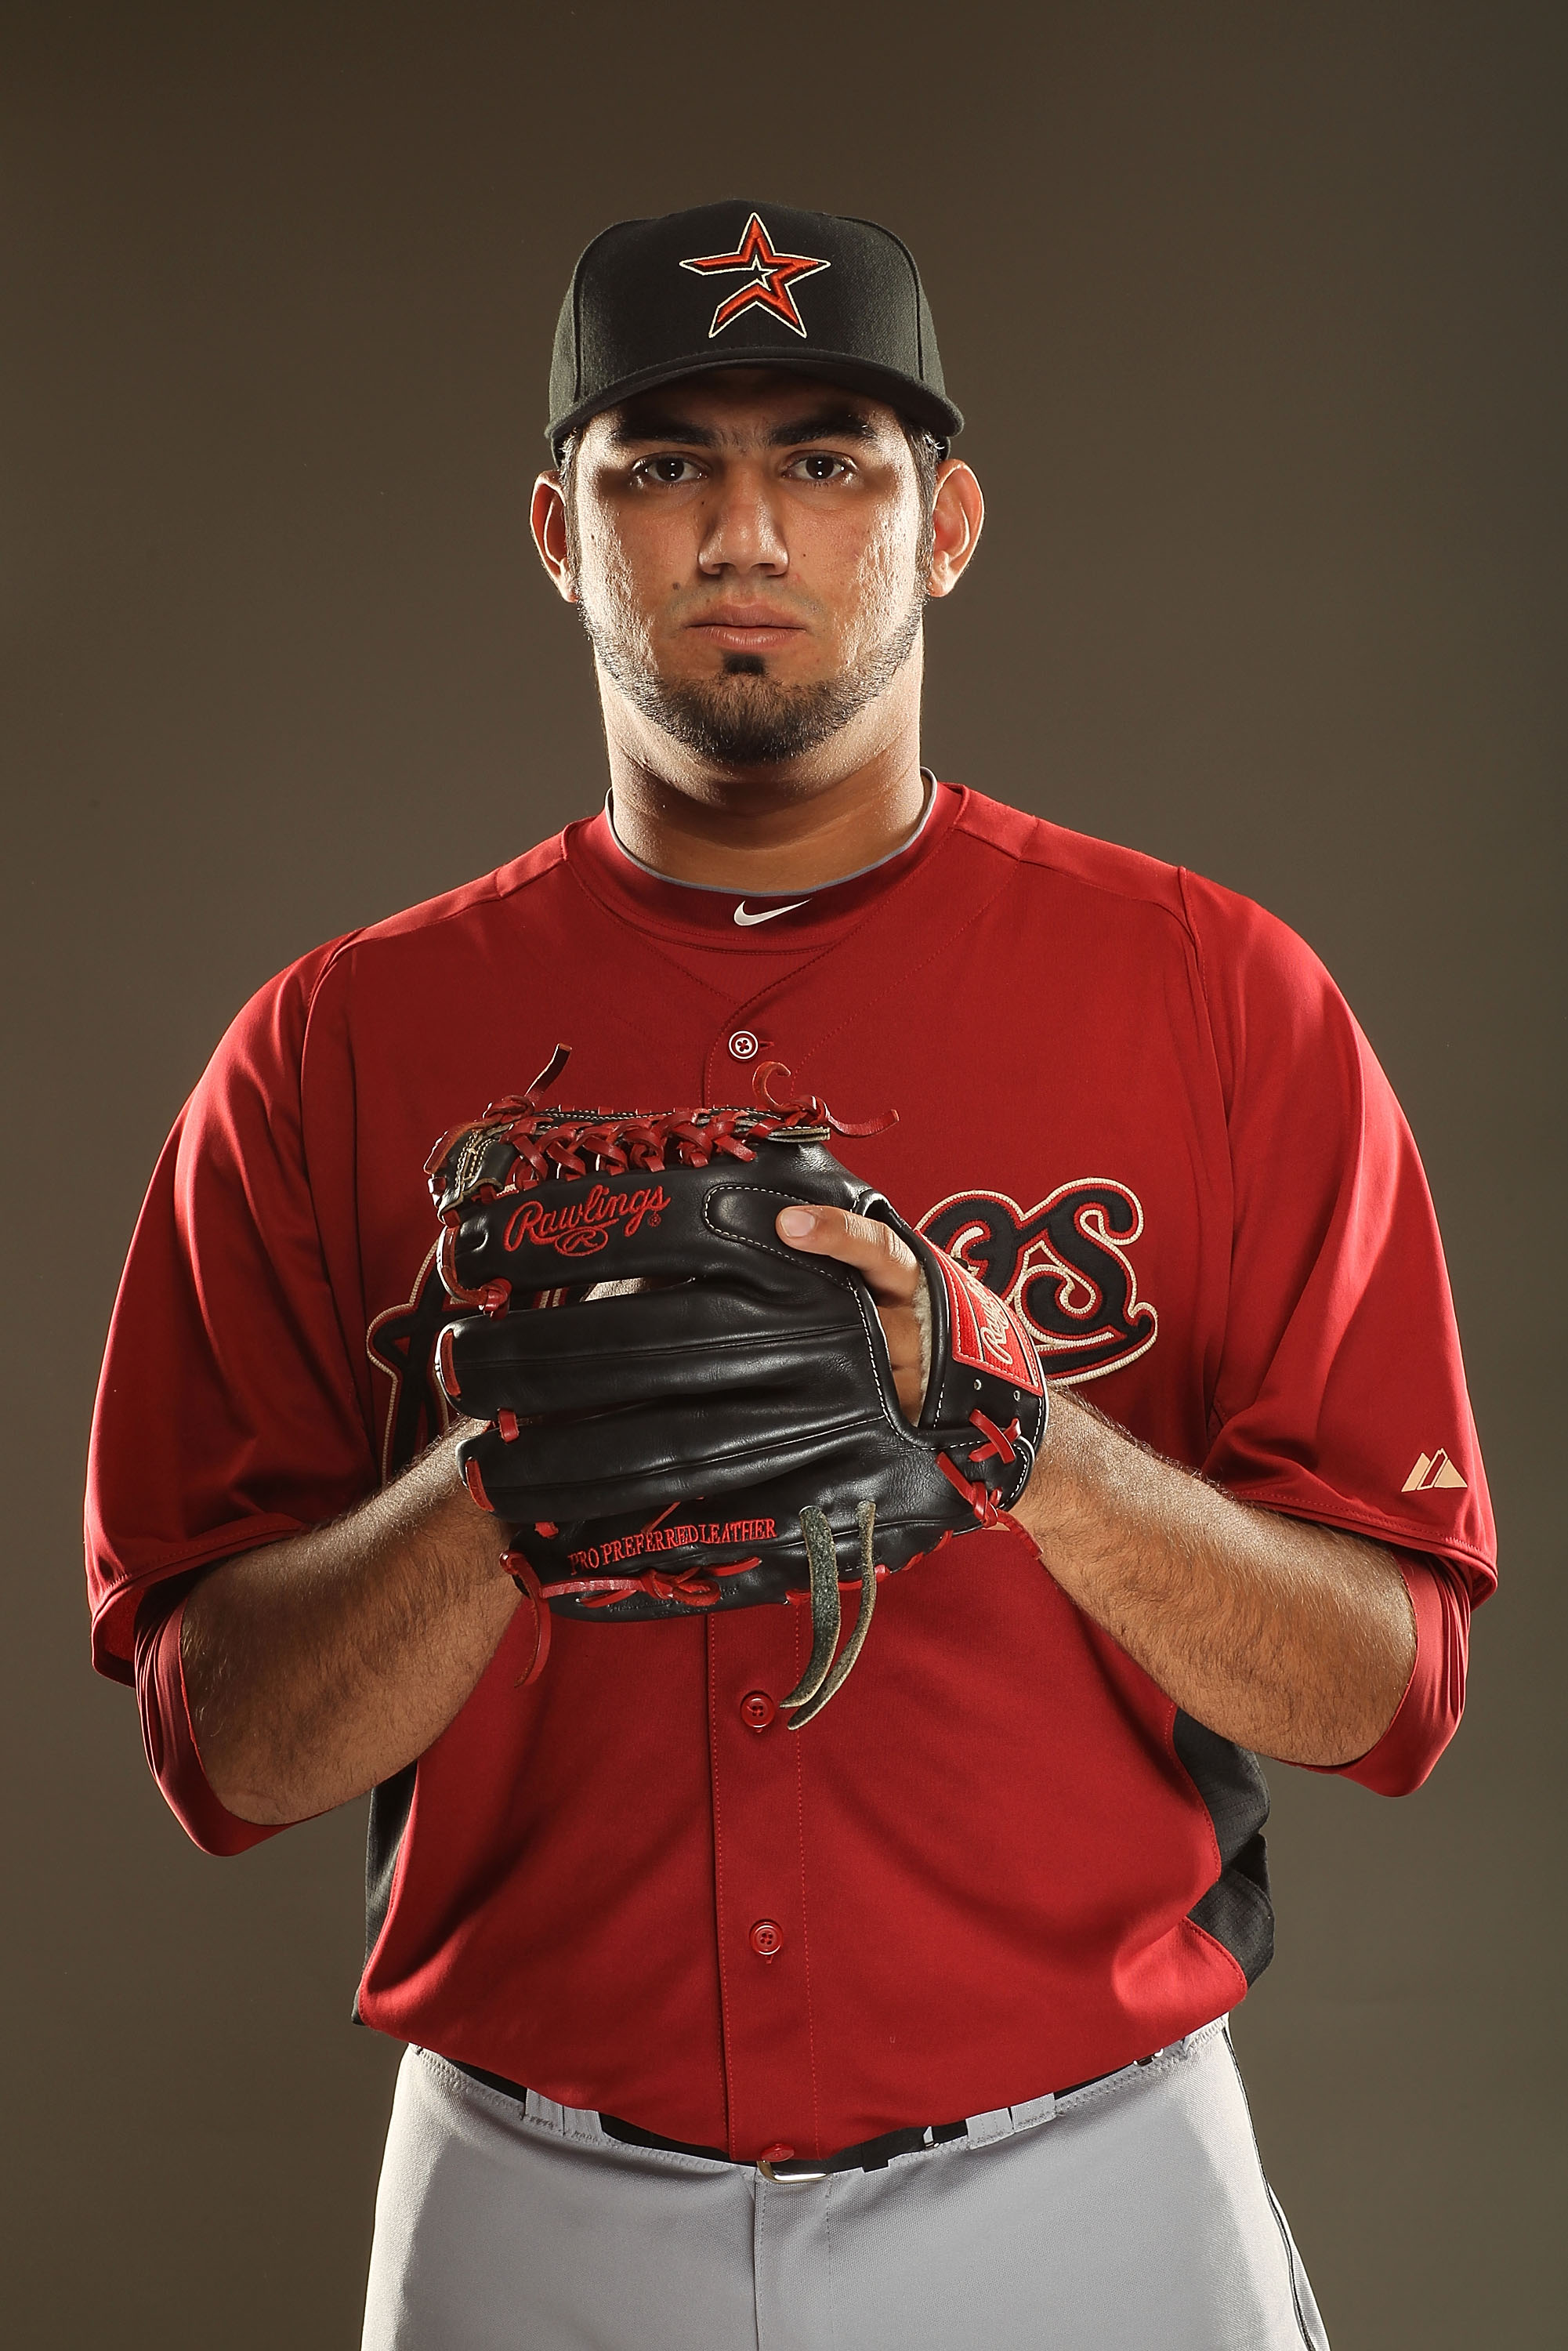 Wilton Lopez of the Houston Astros poses during photo day at Osceola  News Photo - Getty Images